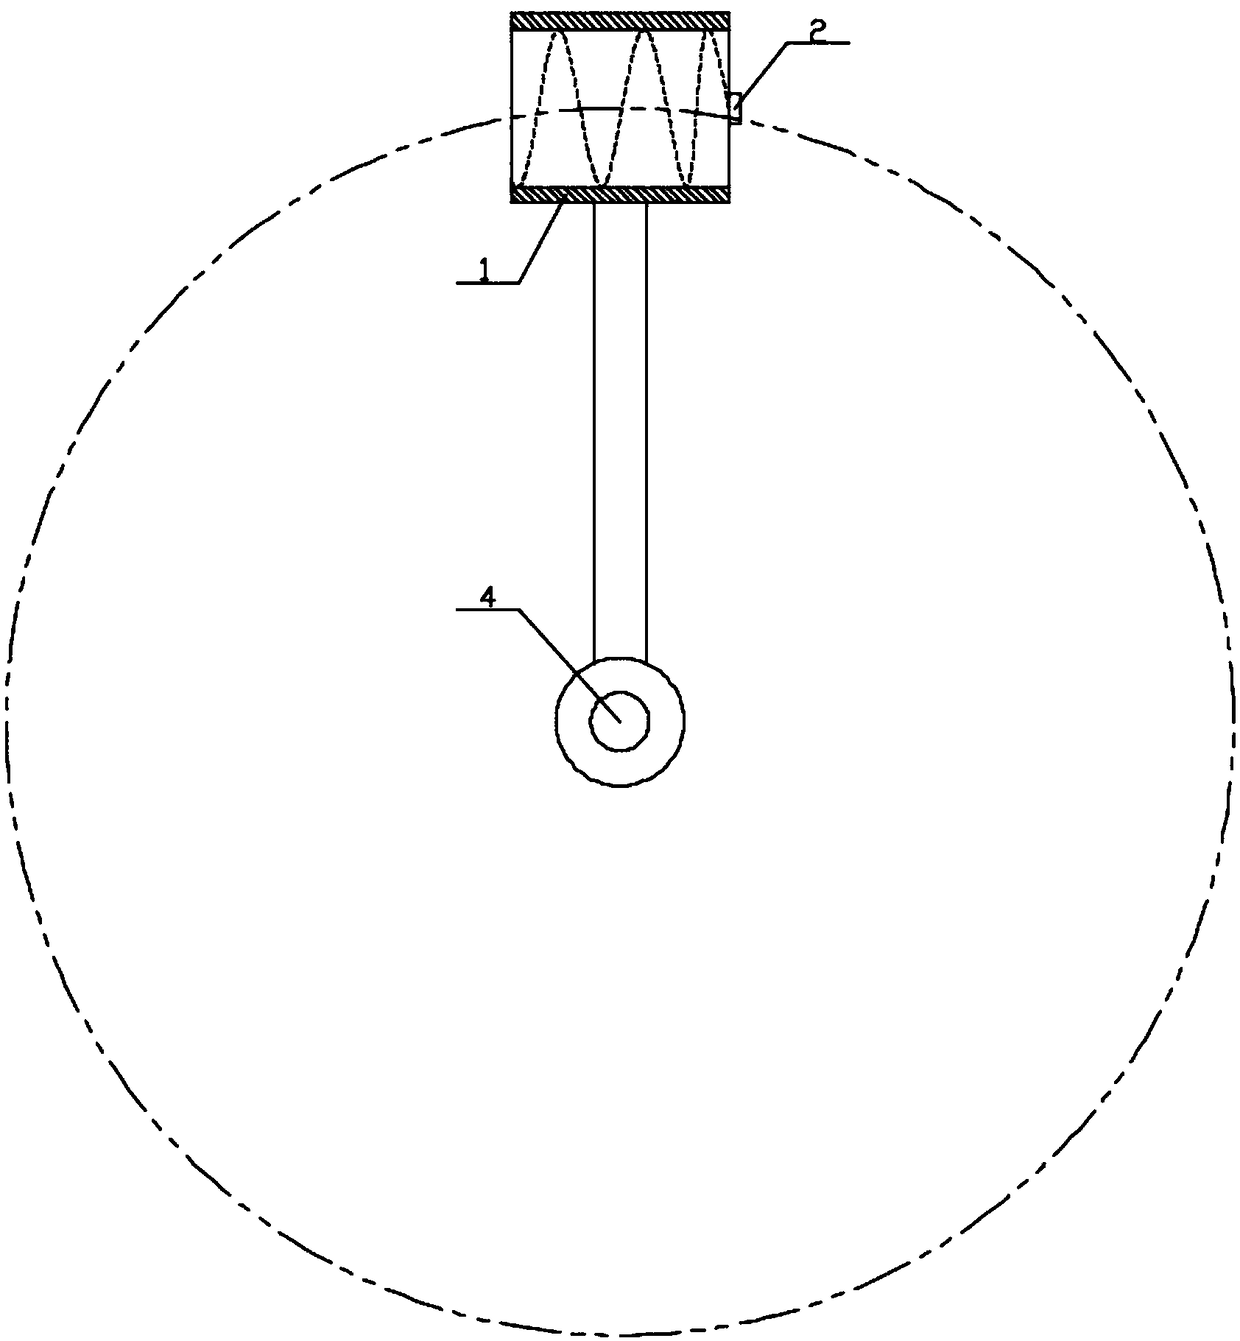 Impurity or foreign matter separating device for continuous moving media